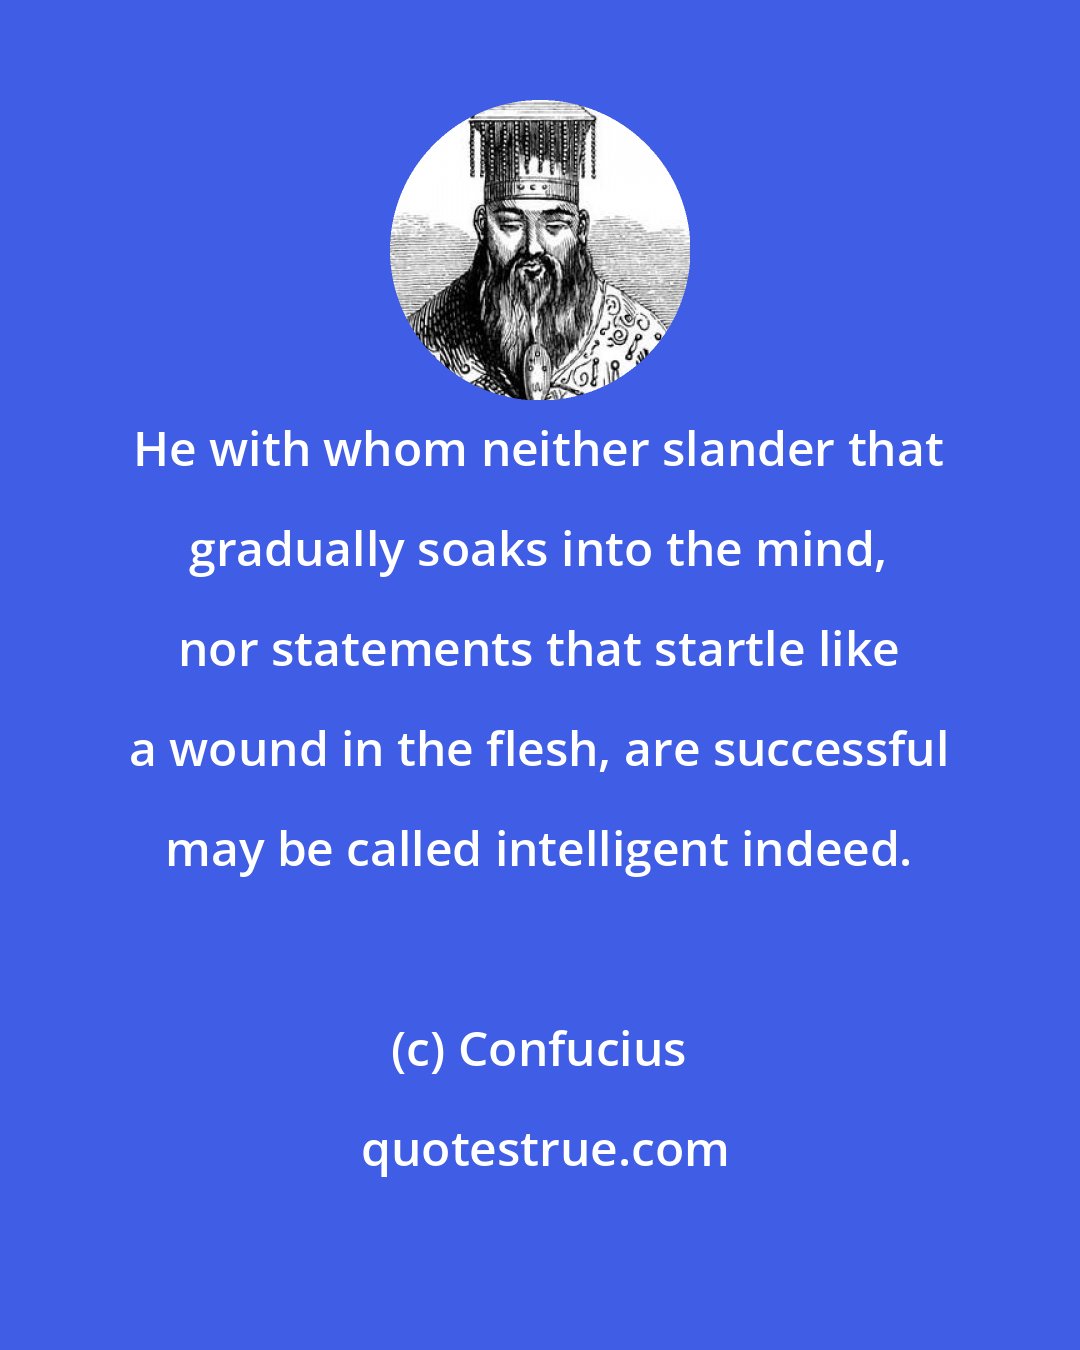 Confucius: He with whom neither slander that gradually soaks into the mind, nor statements that startle like a wound in the flesh, are successful may be called intelligent indeed.